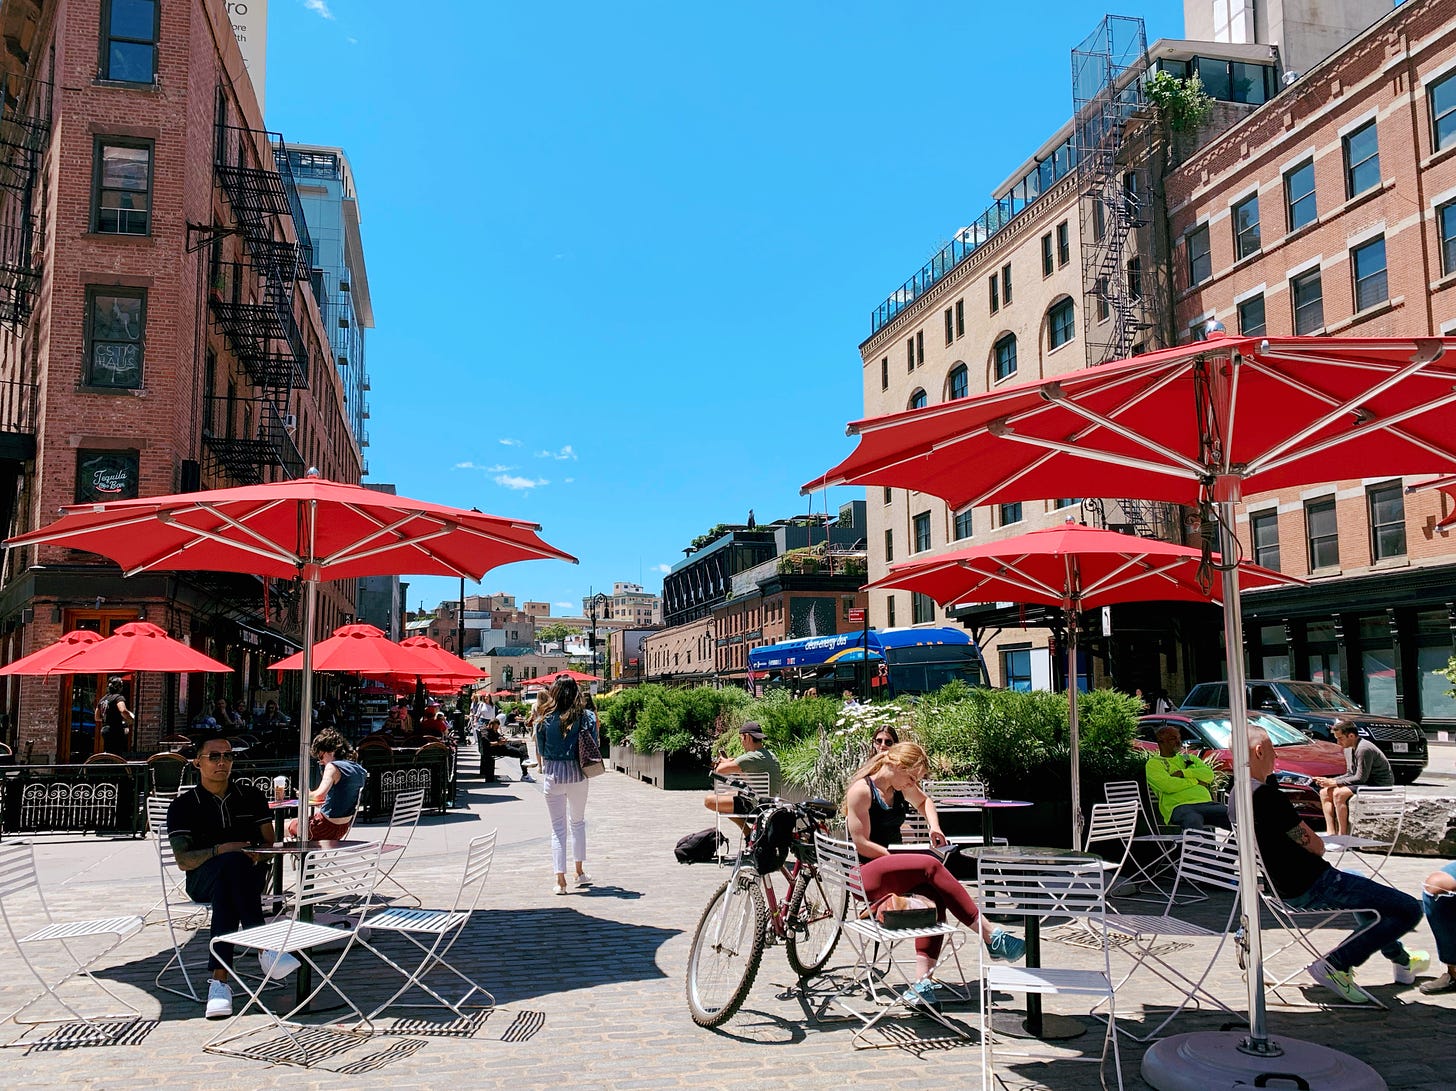 Outdoor plaza where 9th ave meets Hudson St in Chelsea